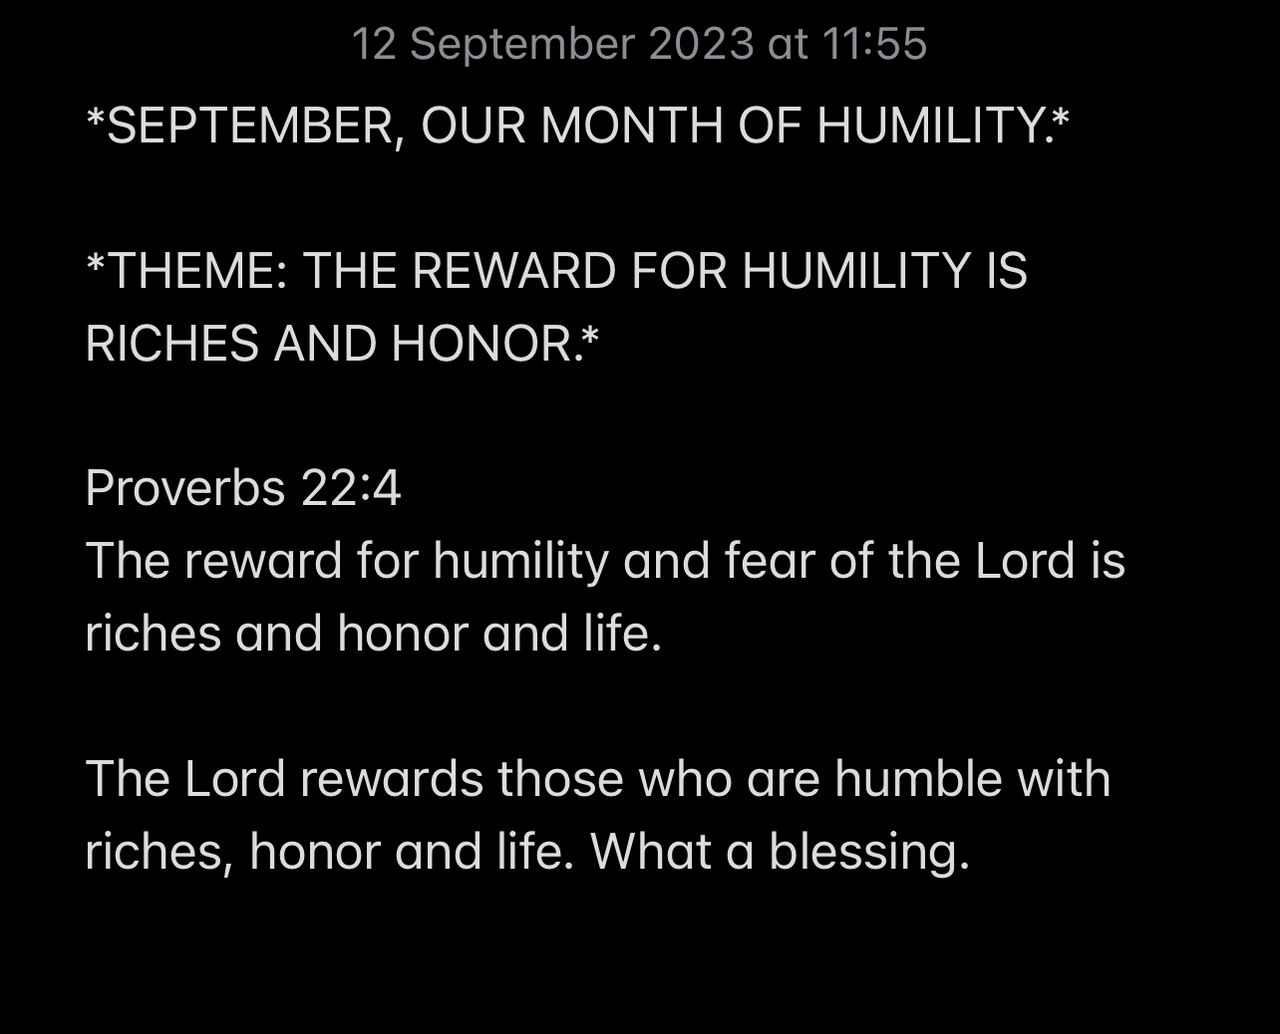 THE REWARD FOR HUMILITY IS RICHES AND HONOR.